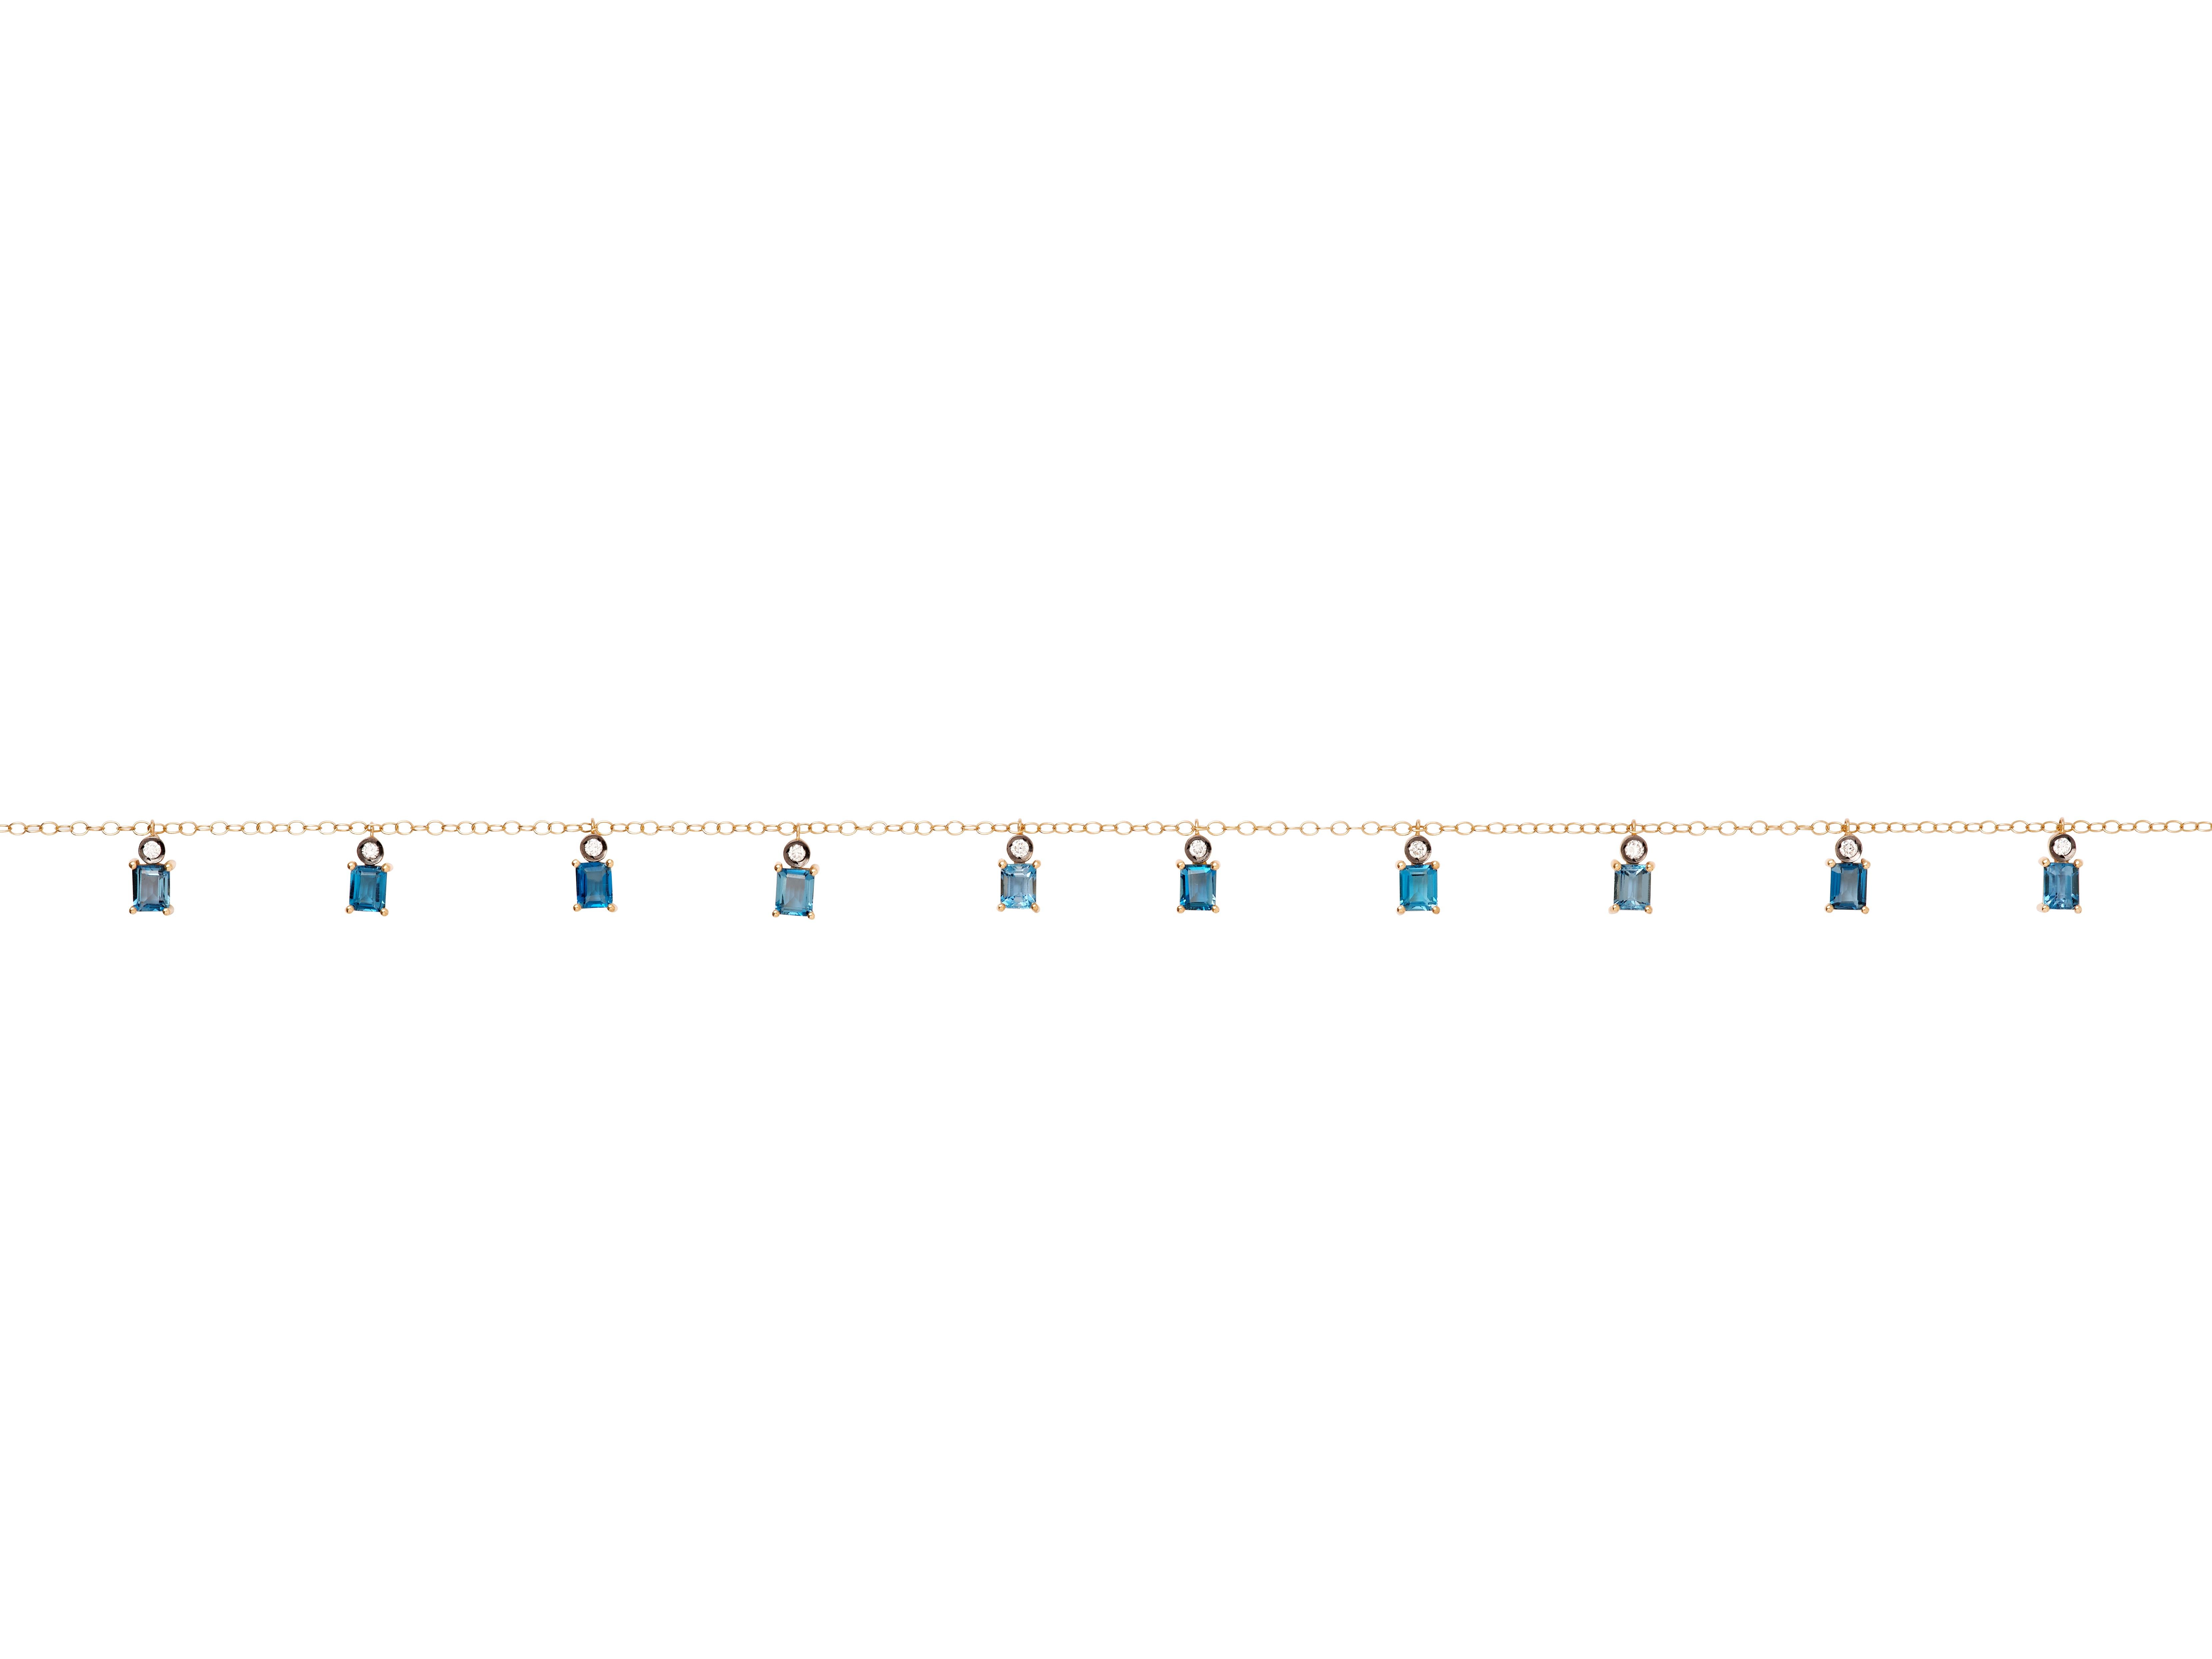 This beautifully delicate 18k yellow gold necklace featuring ten semi-precious Blue Topaz and Diamond charms that can be worn alone, or layered with other necklaces to create a playful and effortlessly stylish look. Can be worn at multiple lengths